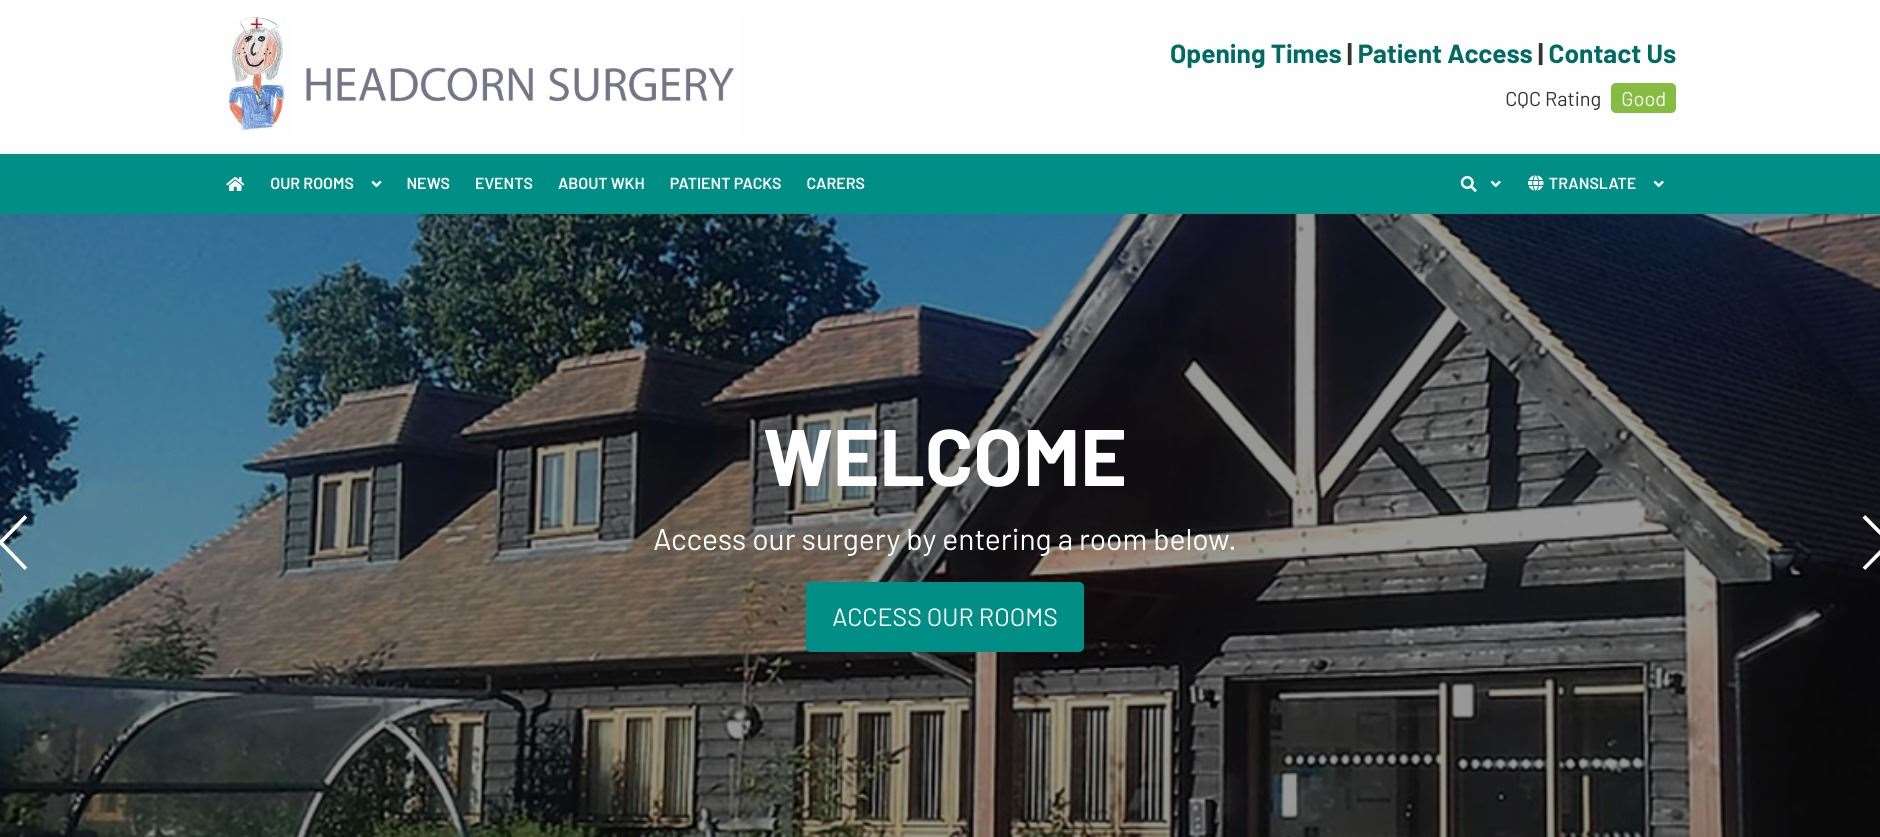 Headcorn surgery made the announcement on its website (31443768)